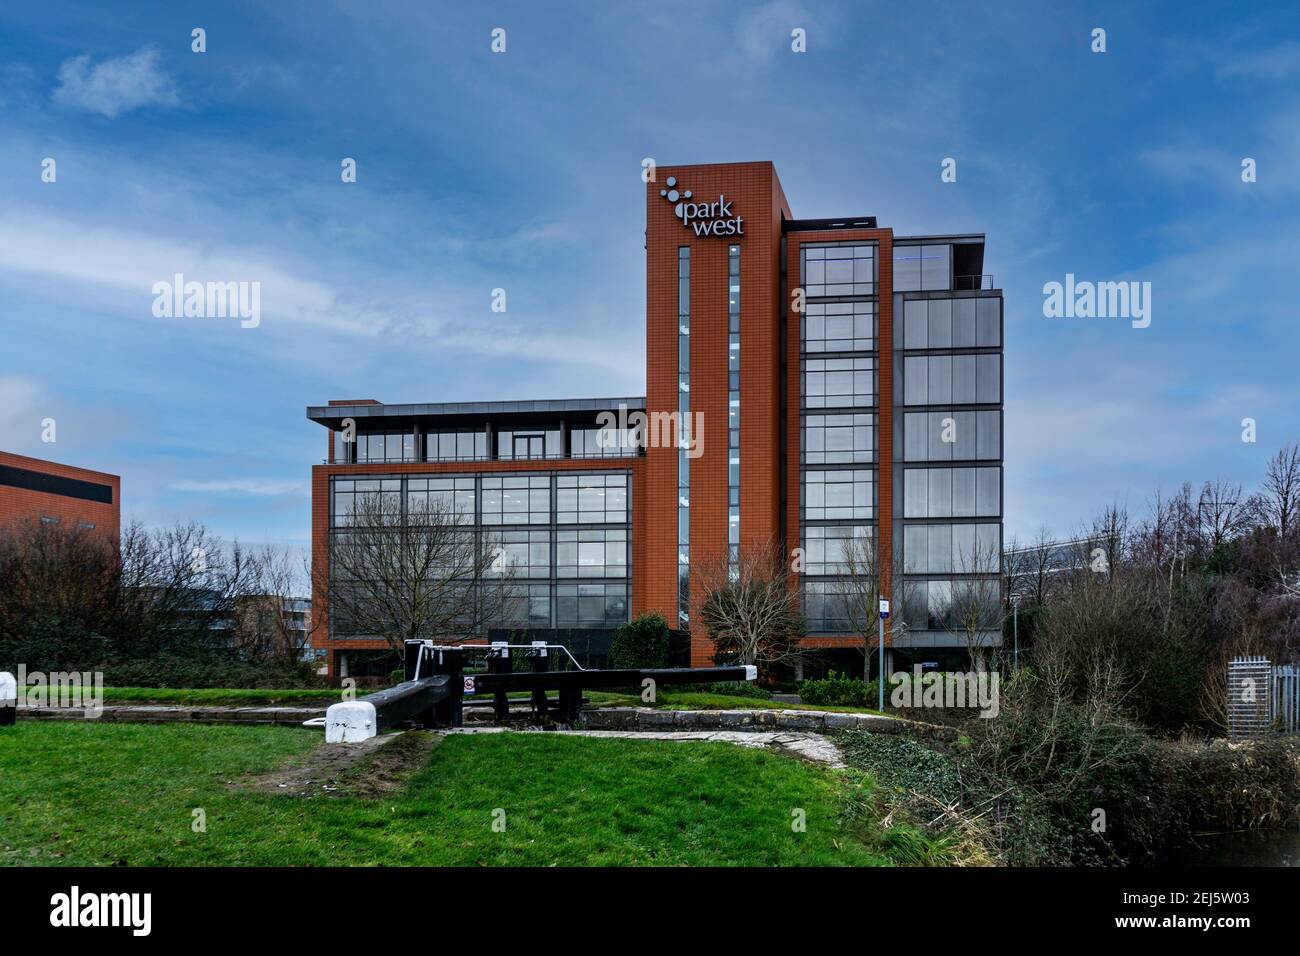 Park West Business Park,  one of the buildings in the Parkwest Business Park in Dublin, Ireland. It is located beside the 8th lock of the Grand Canal. Stock Photo